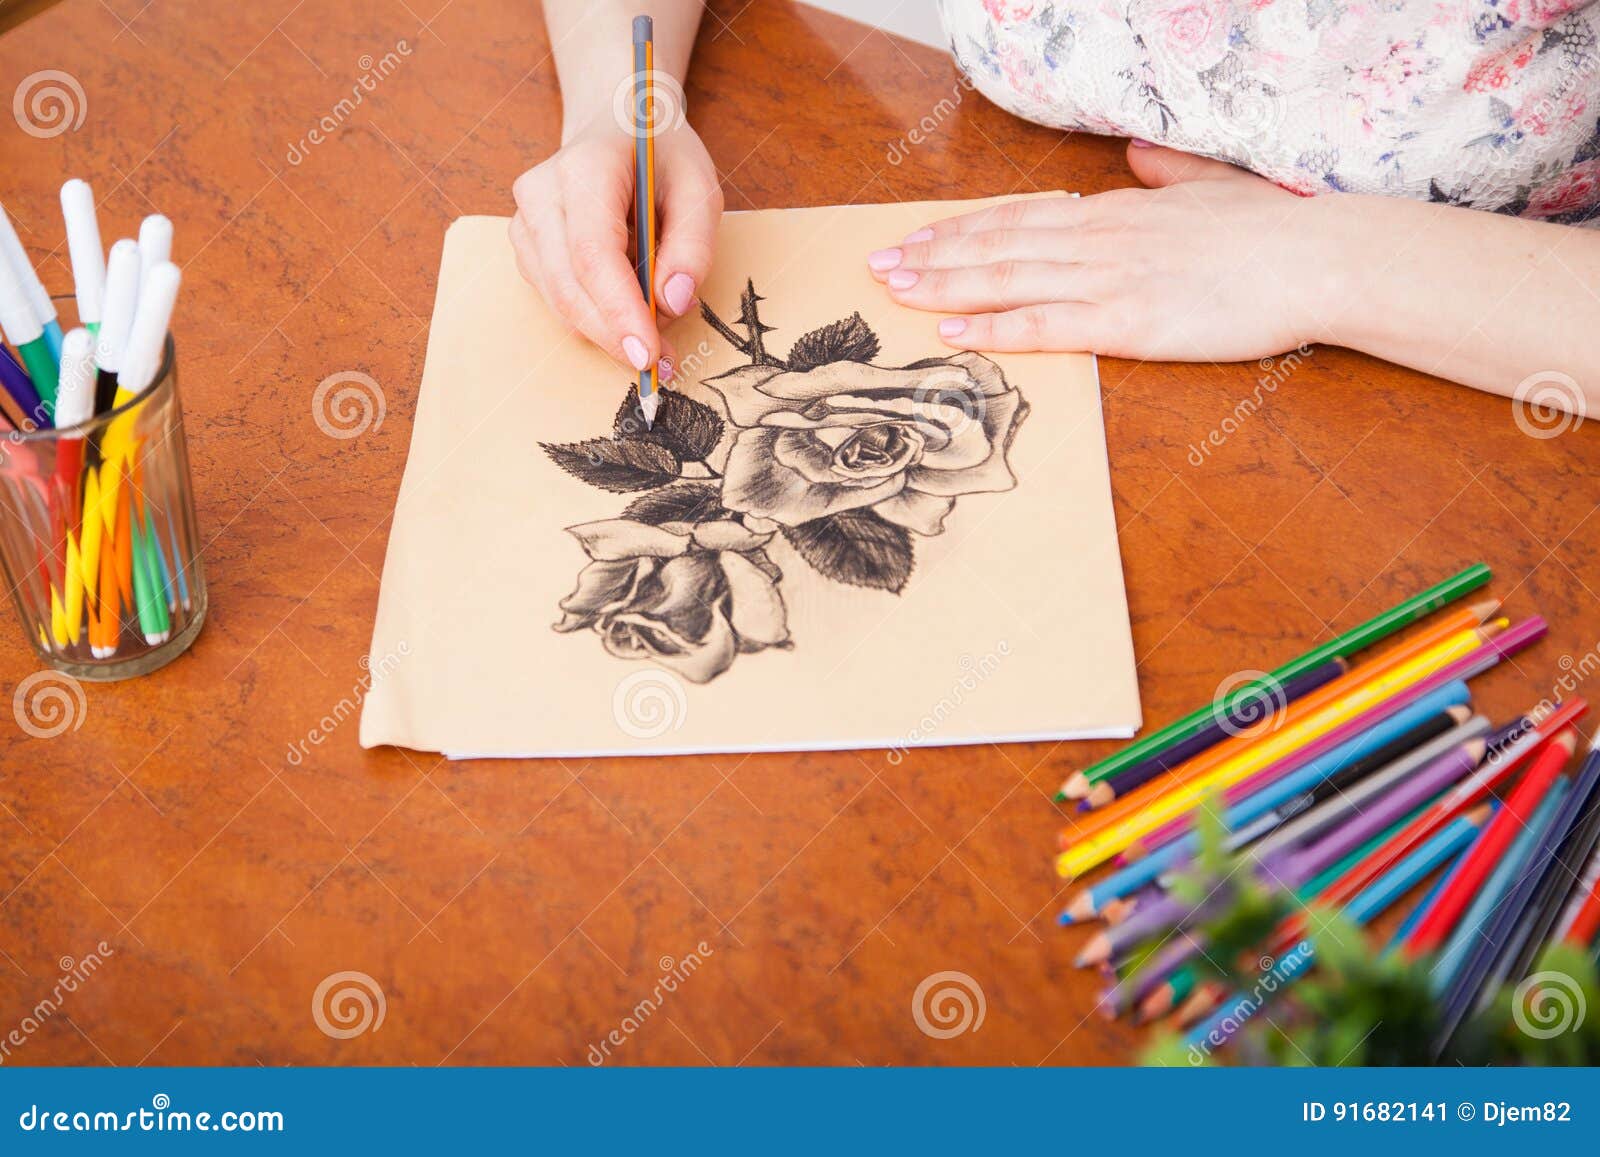 Closeup Of Drawing At The Desk Stock Image Image Of Creativity